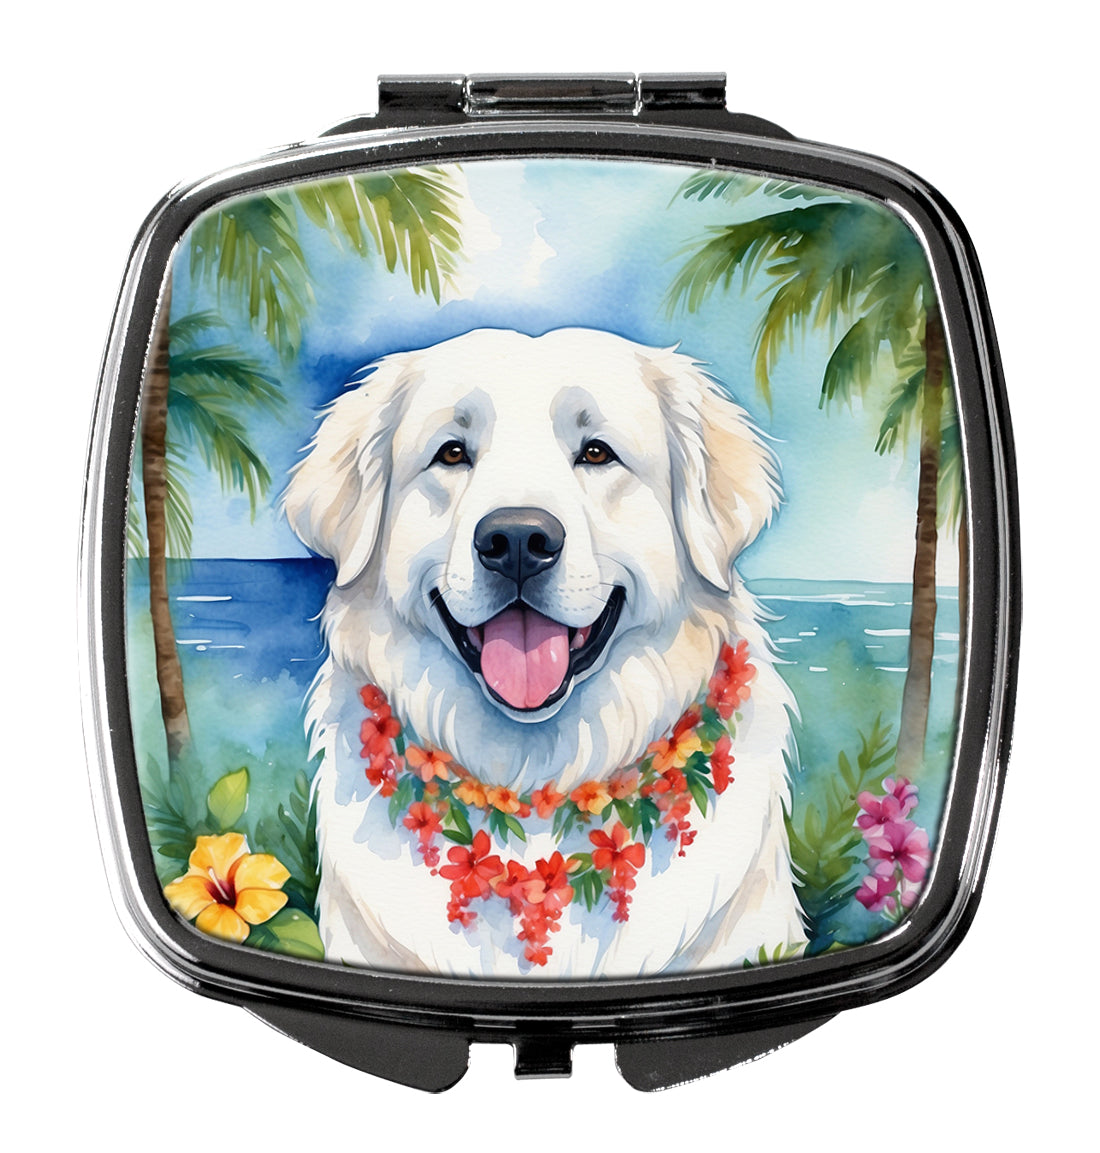 Buy this Great Pyrenees Luau Compact Mirror